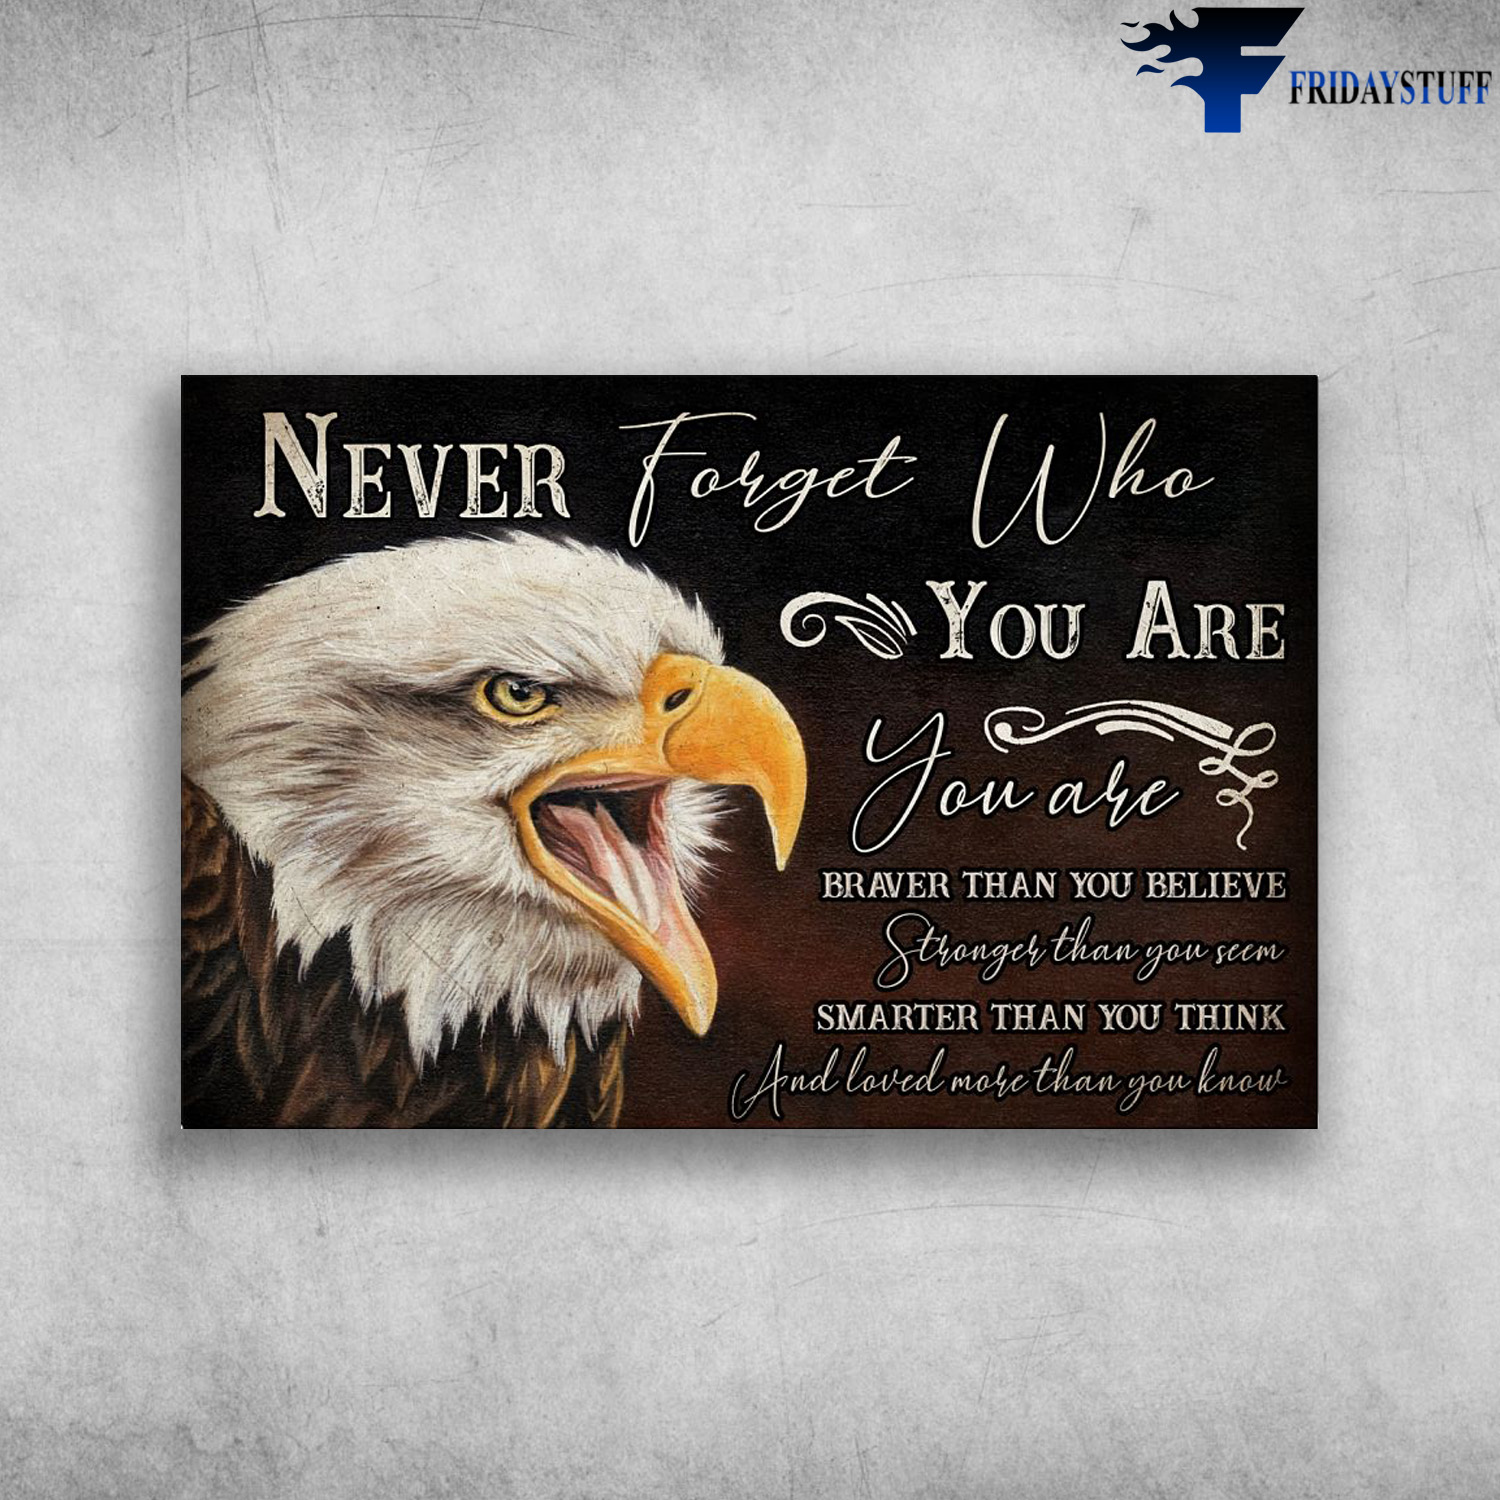 The Eagle - Never Forget Who You Are Braver Than You Believe, Stronger Than You Seem And Loved More Than You Know